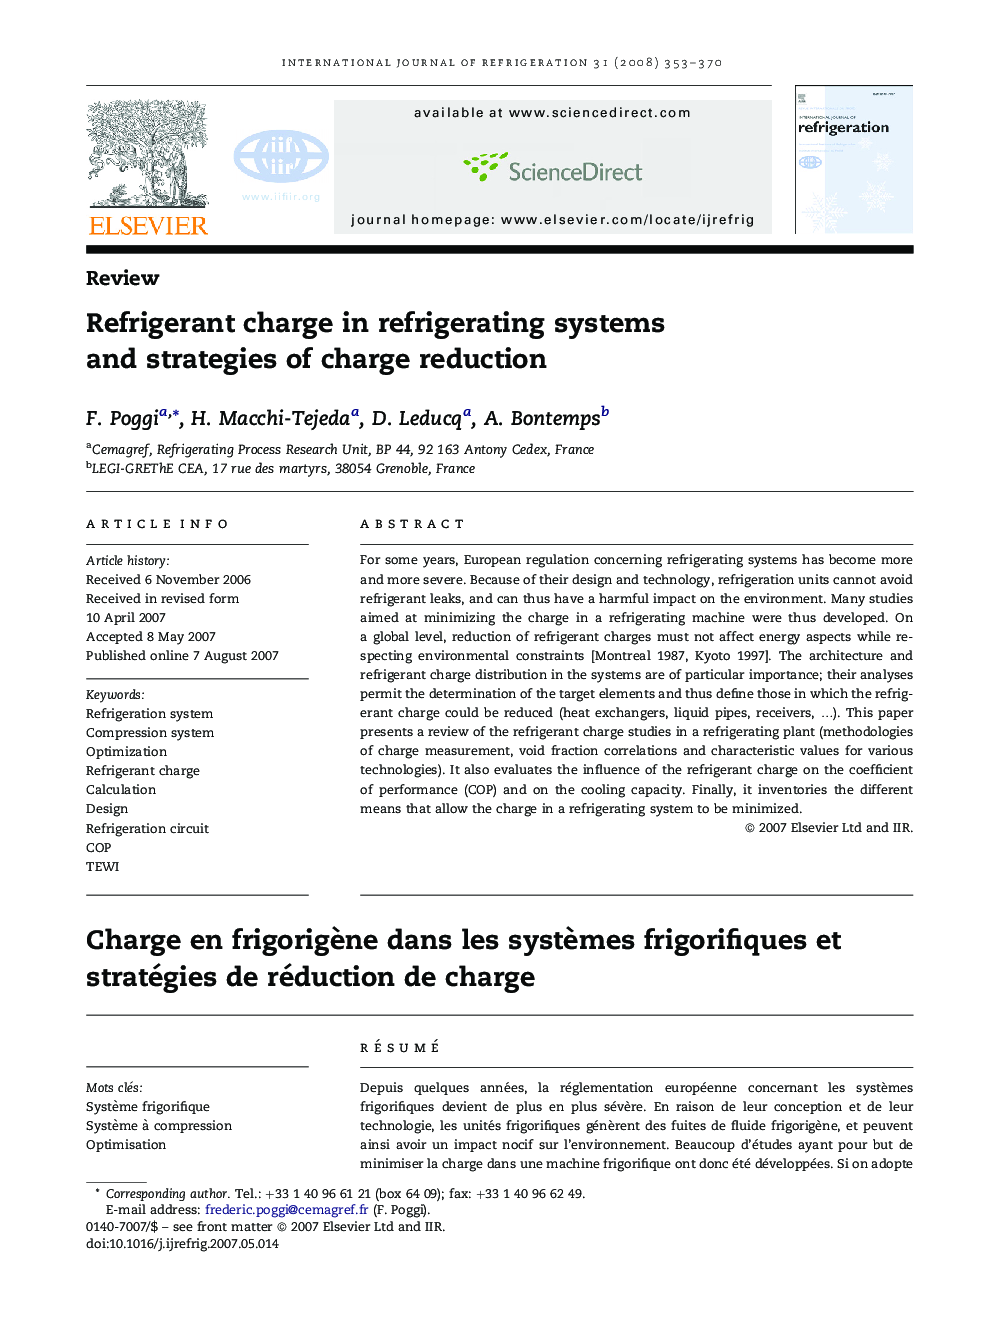 Refrigerant charge in refrigerating systems and strategies of charge reduction